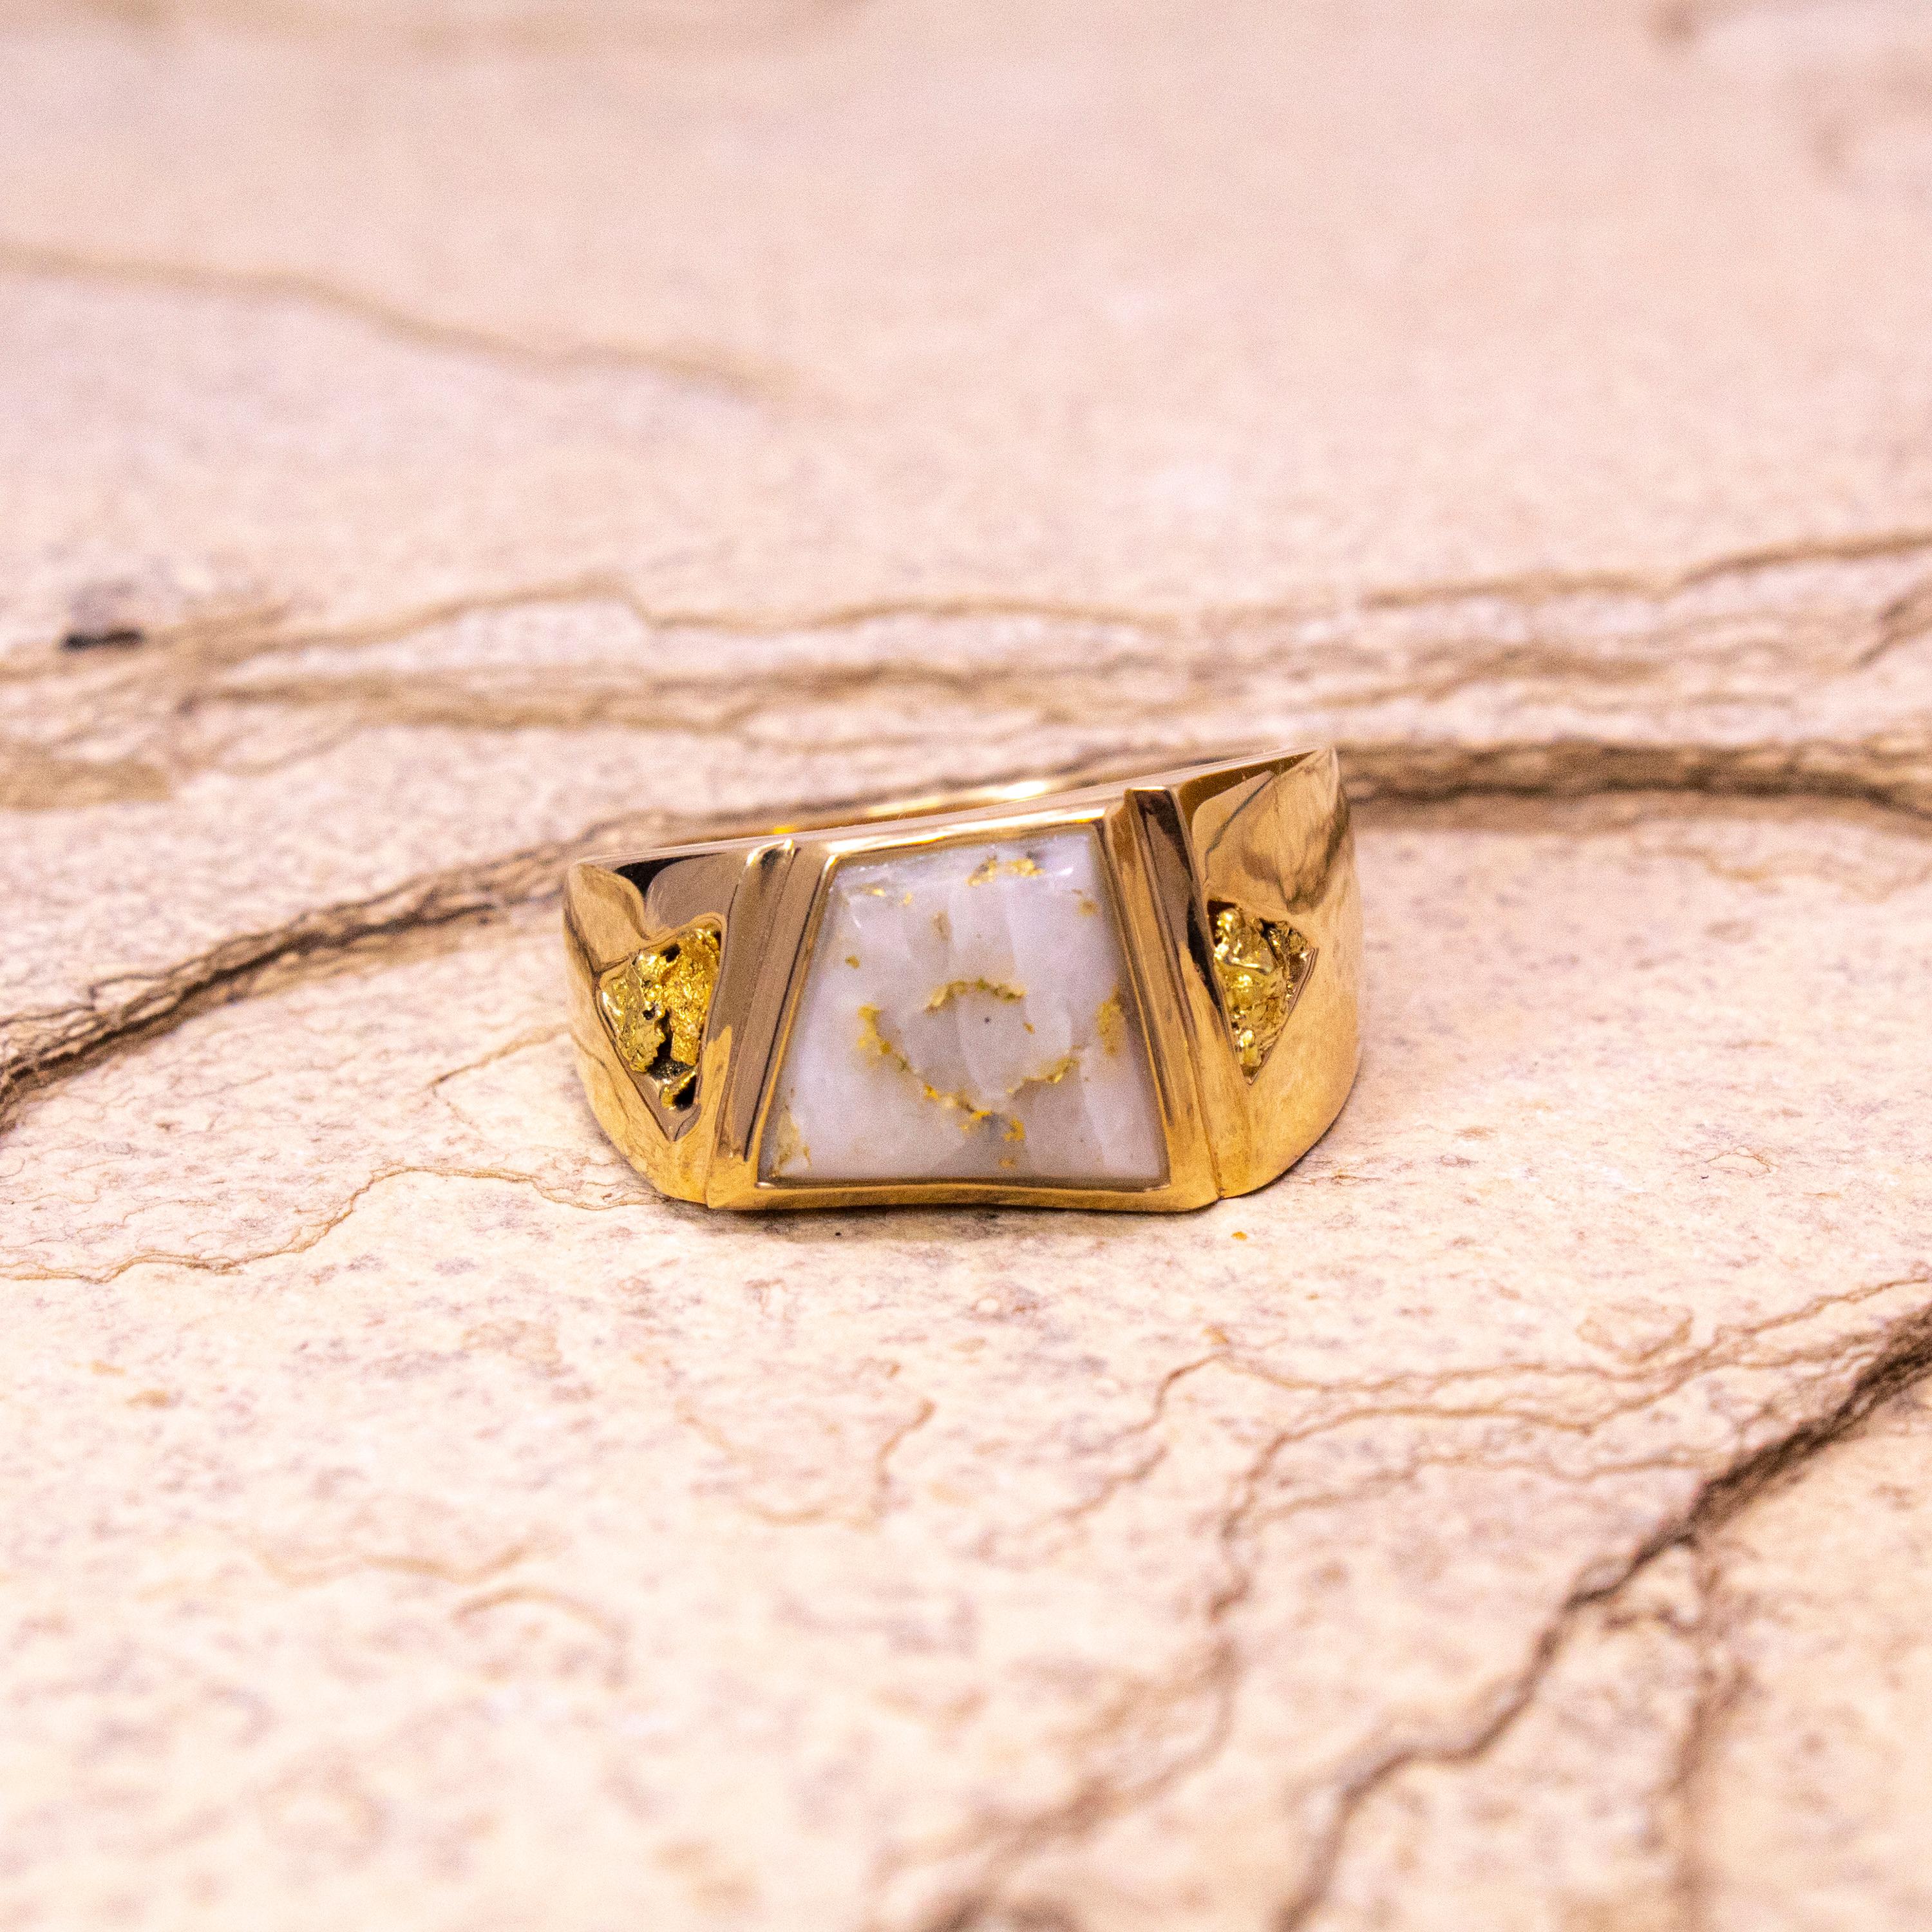 This asymmetrical men's ring features rare natural gold bearing quartz accented by natural gold nuggets. The modern, trapezoidal shape is an unexpected (but perfect) frame for these natural materials. The vivid colors of the raw gold pop